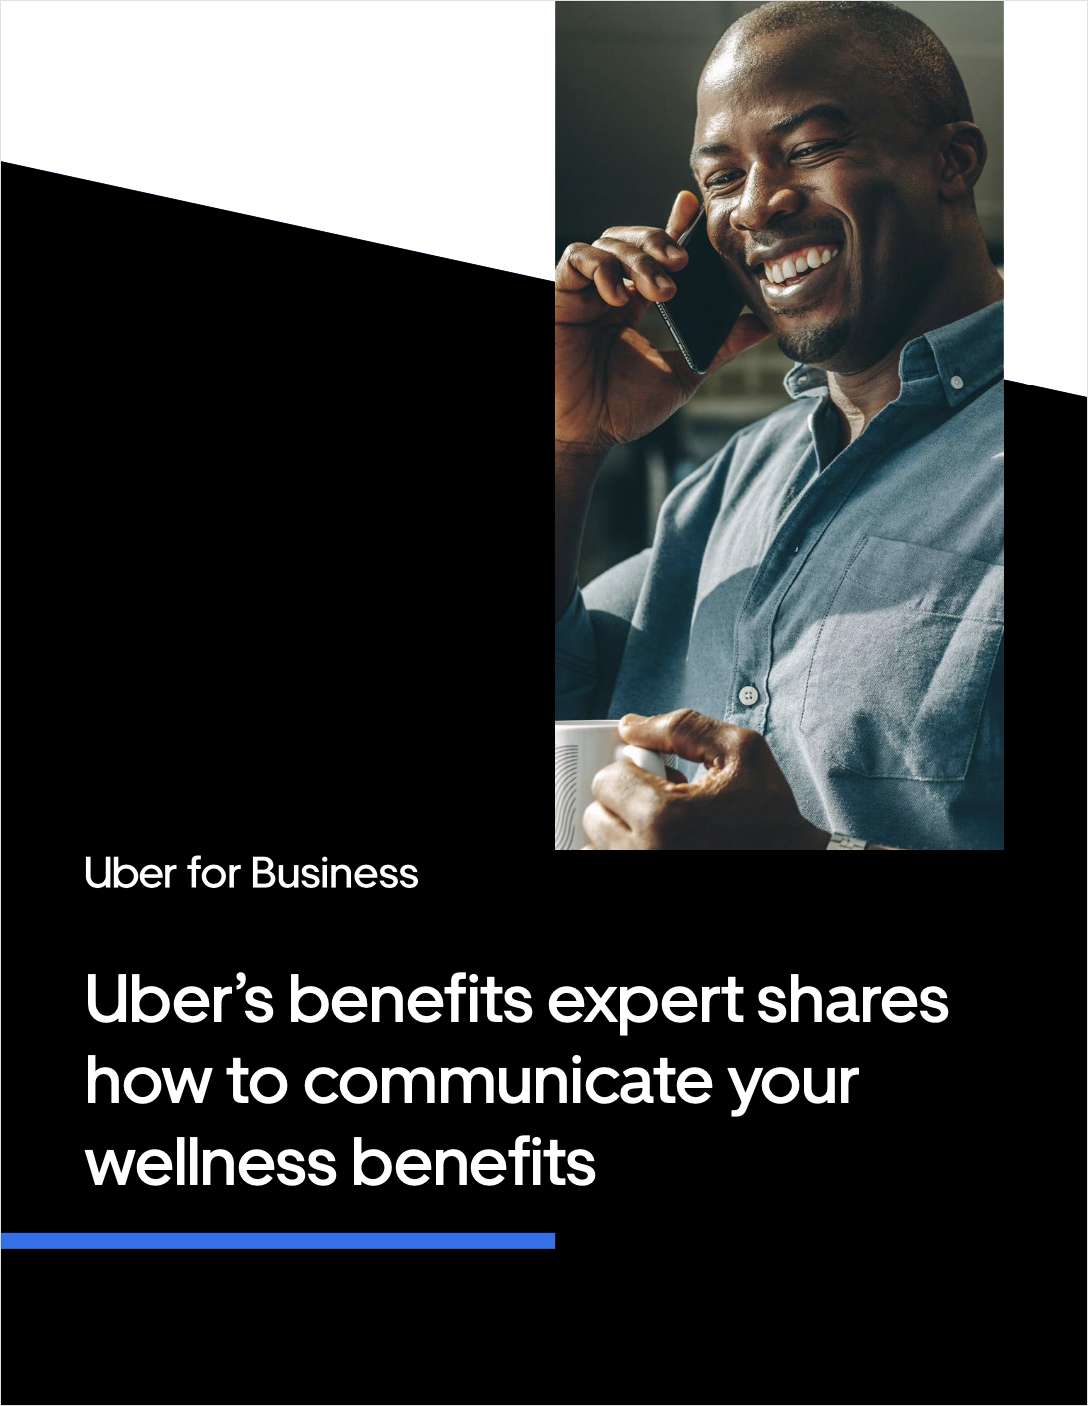 Uber's benefits expert shares how to communicate your wellness benefits